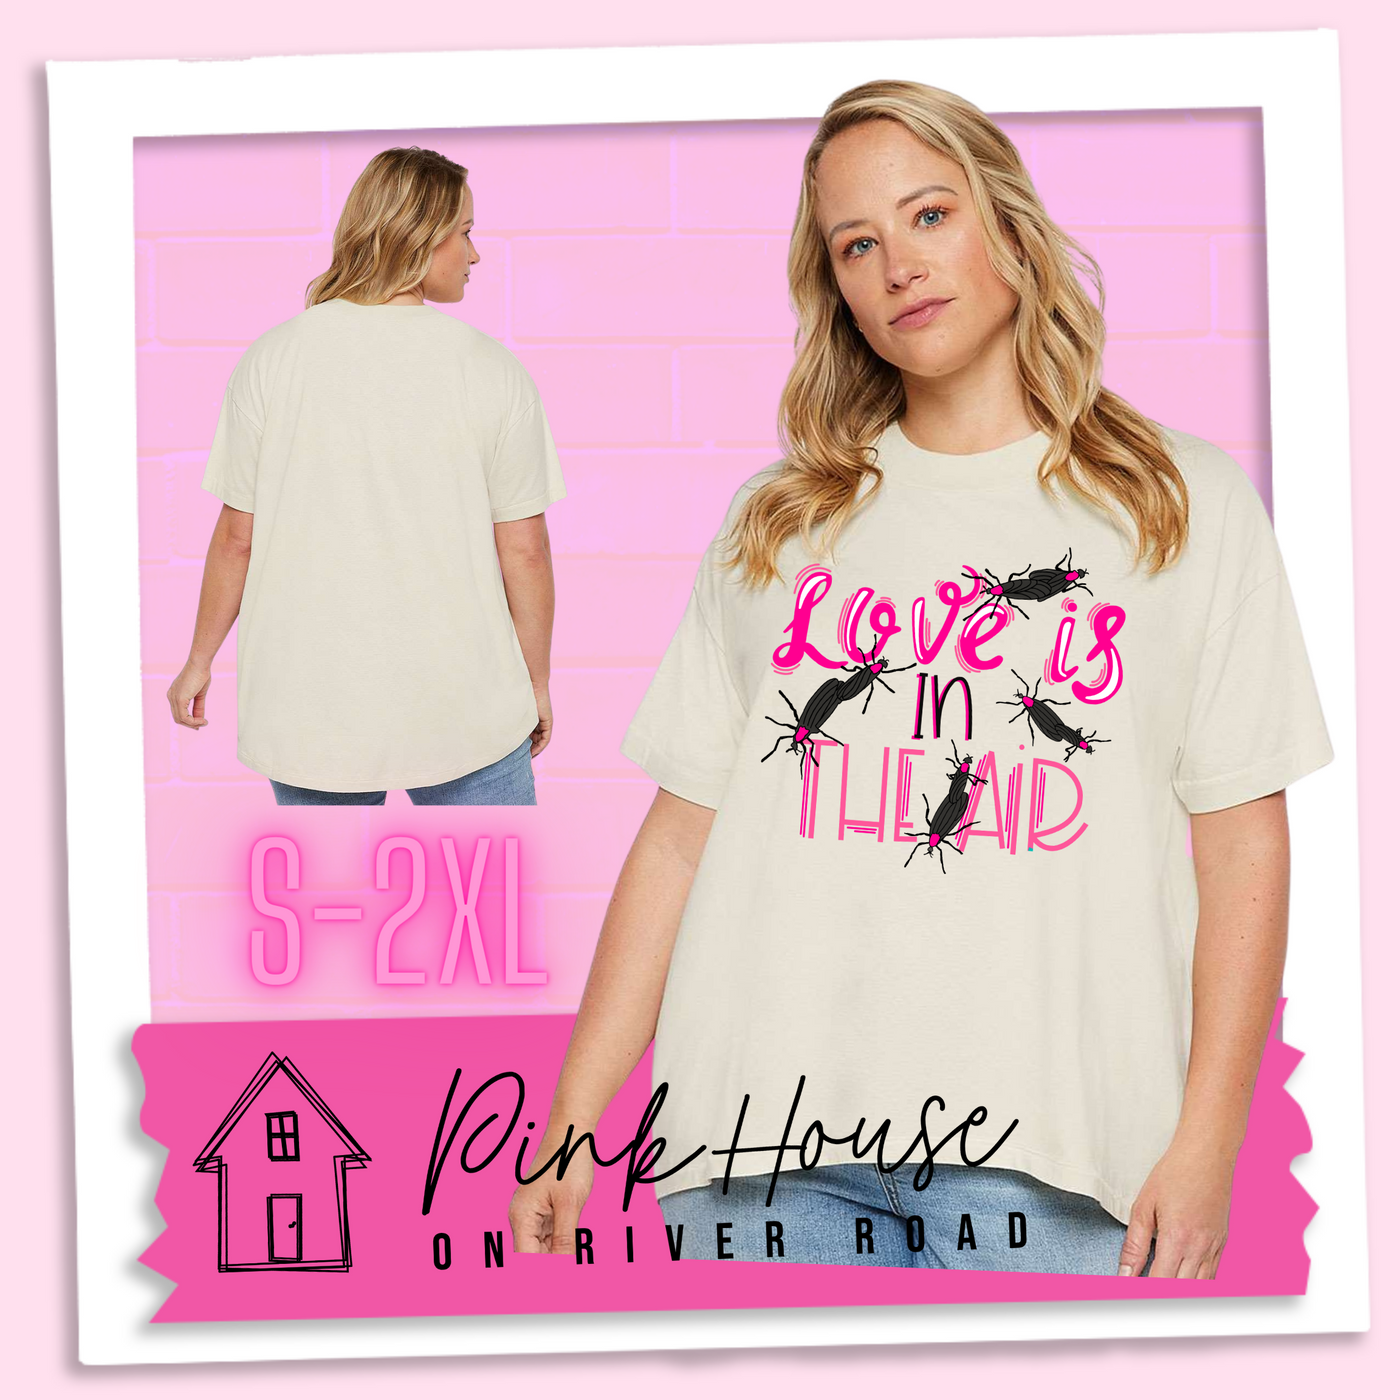 Cream Oversized HiLo Tee with Graphic. Graphic says " Love Is in the Air". "Love Is" is a hot pink cursive font with white highlights and hot pink accent lines underneath is the word "In" Is it in a black font with a hot pink highlight. on the bottom is "The Air" in Light pink with light pink accent lines. There are also black flying bugs with hot pink spots behind their heads